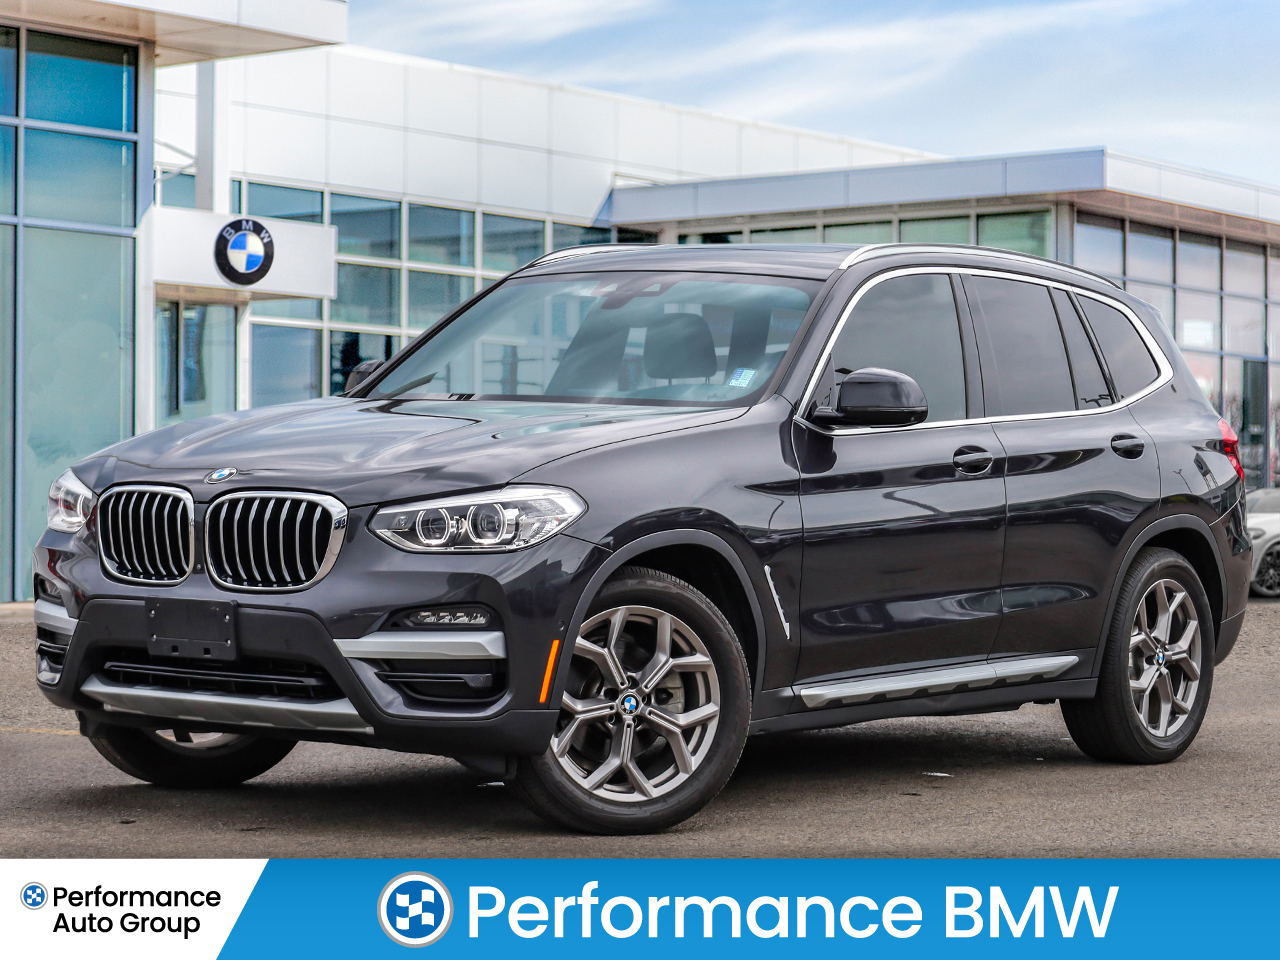 2020 BMW X3 Enhanced- BMW Certified Pre Owned- Park Assistance